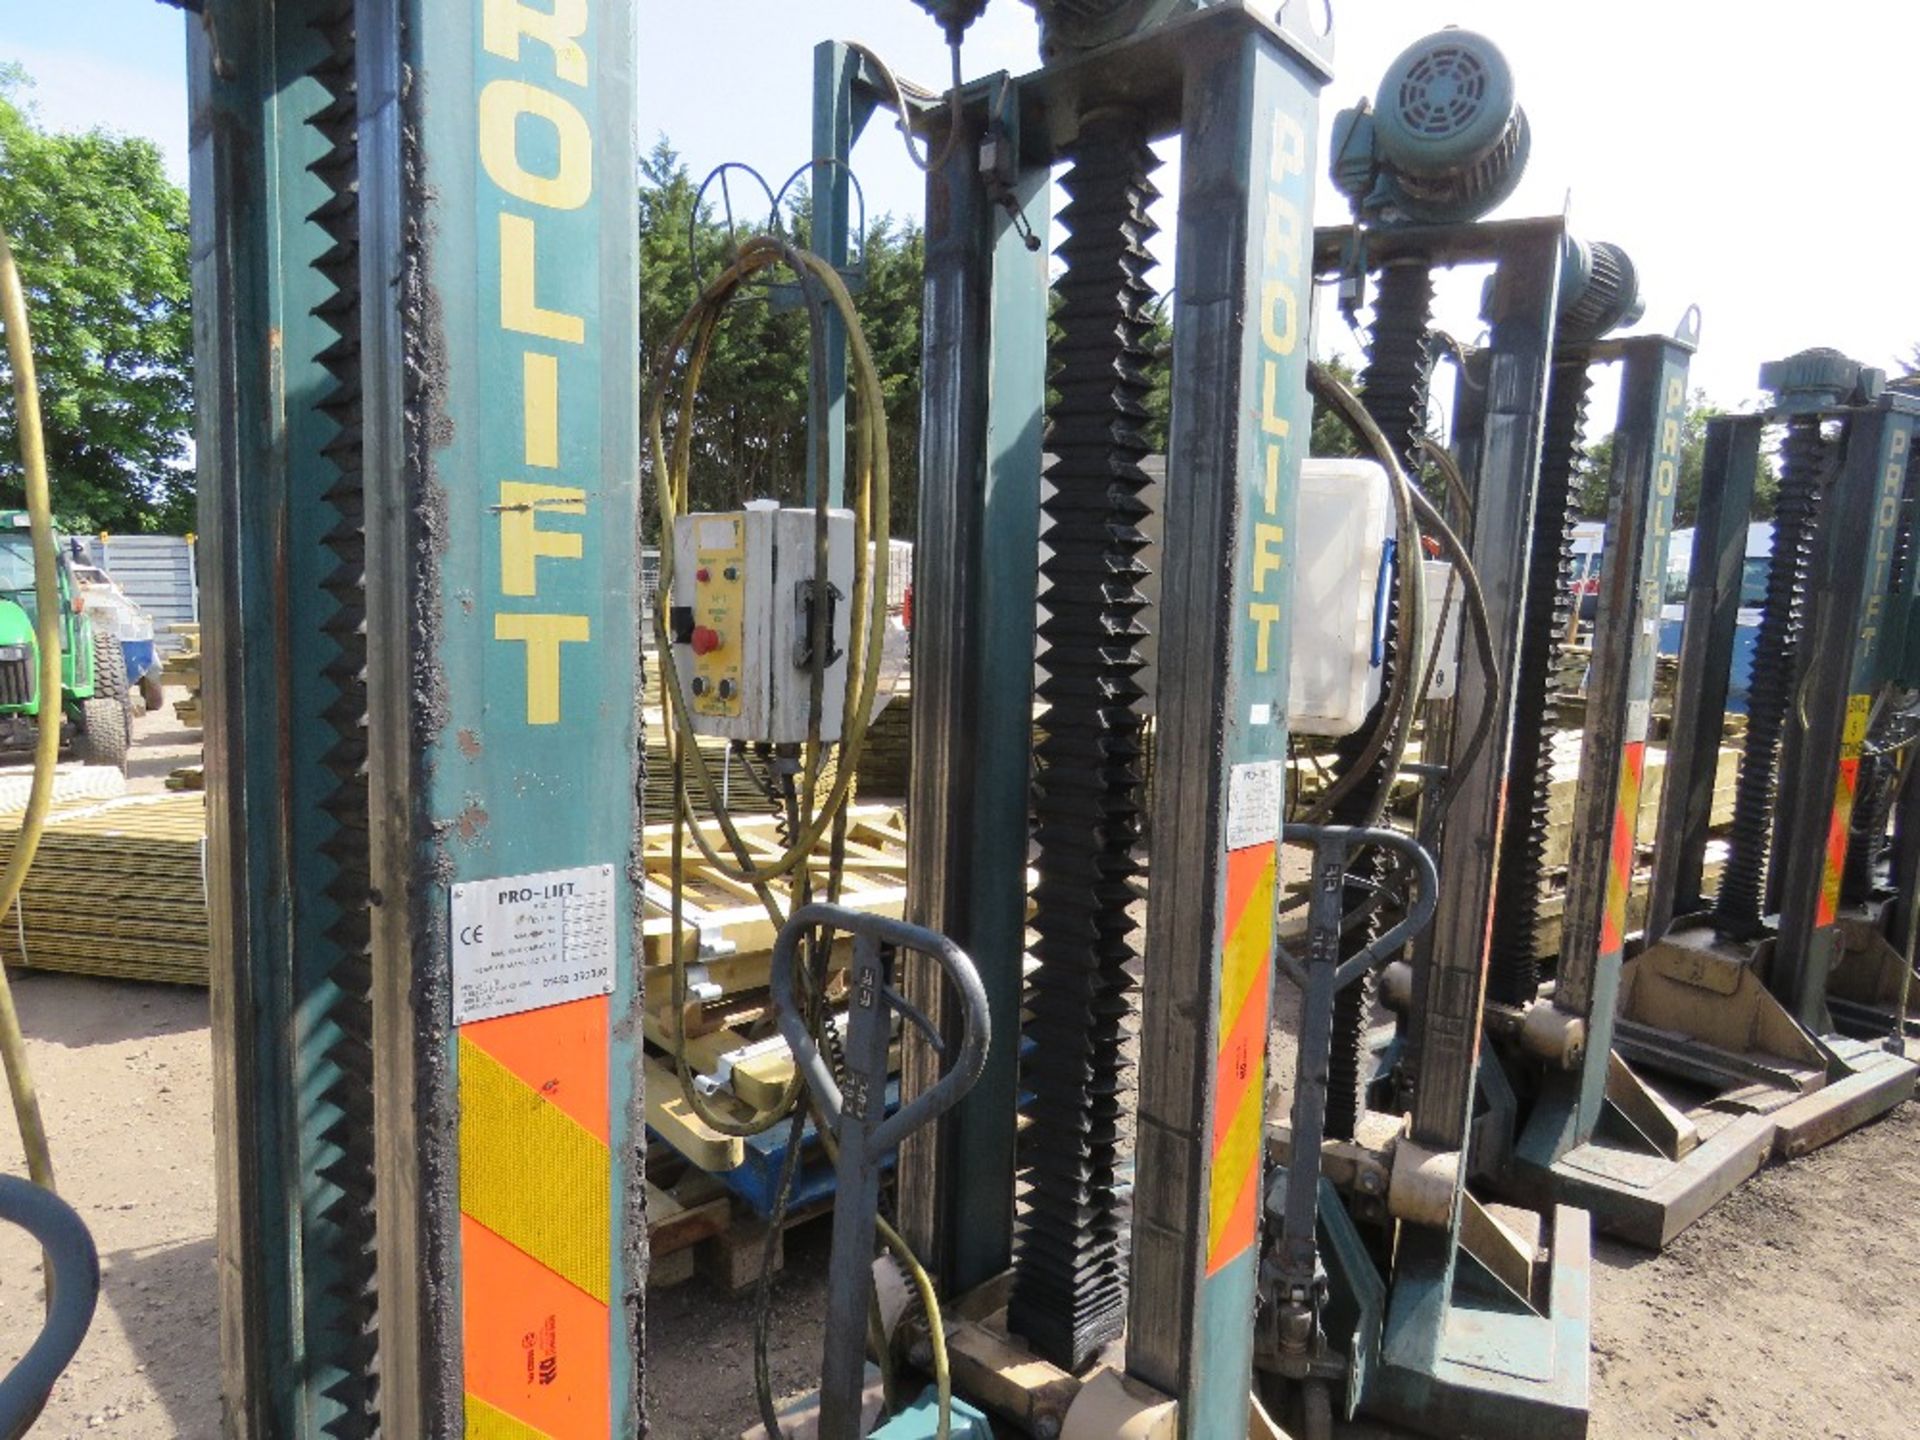 SET OF 4 X PROLIFT PL32 PORTABLE COLUMN LIFT UNITS FOR COMMERCIAL VEHICLES, 8 TONNE RATED CAPACITY, - Image 3 of 4